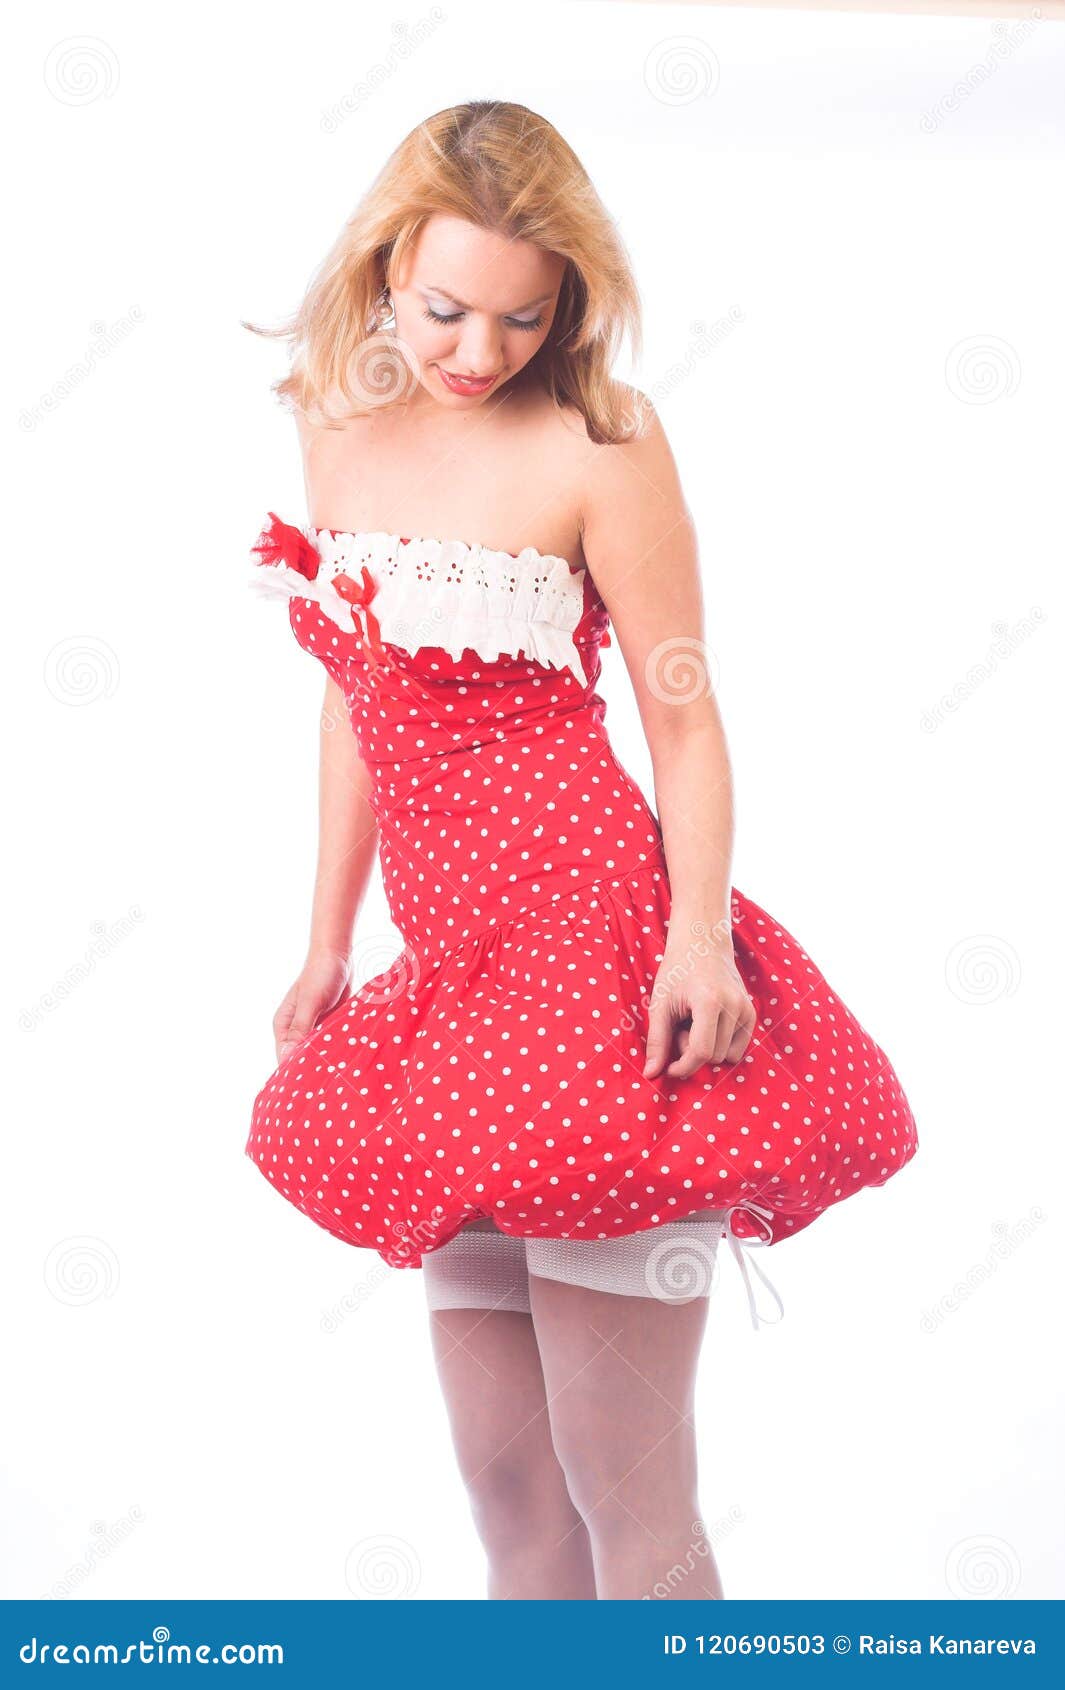 Blond in red dress. stock image. Image of beauty, cosmetics - 120690503